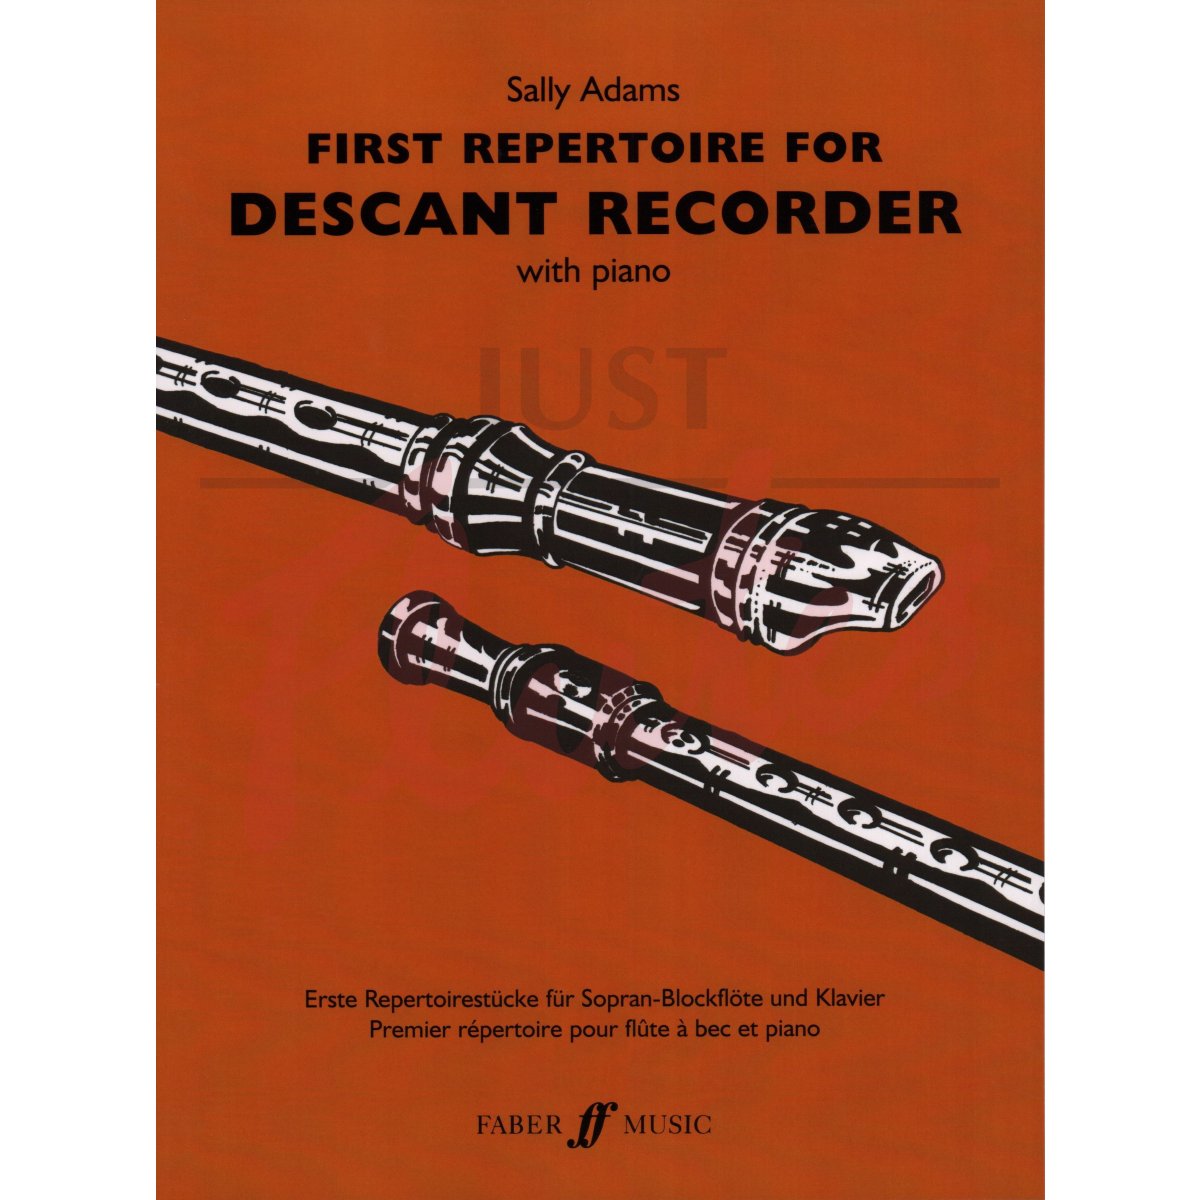 First Repertoire For Descant Recorder with Piano